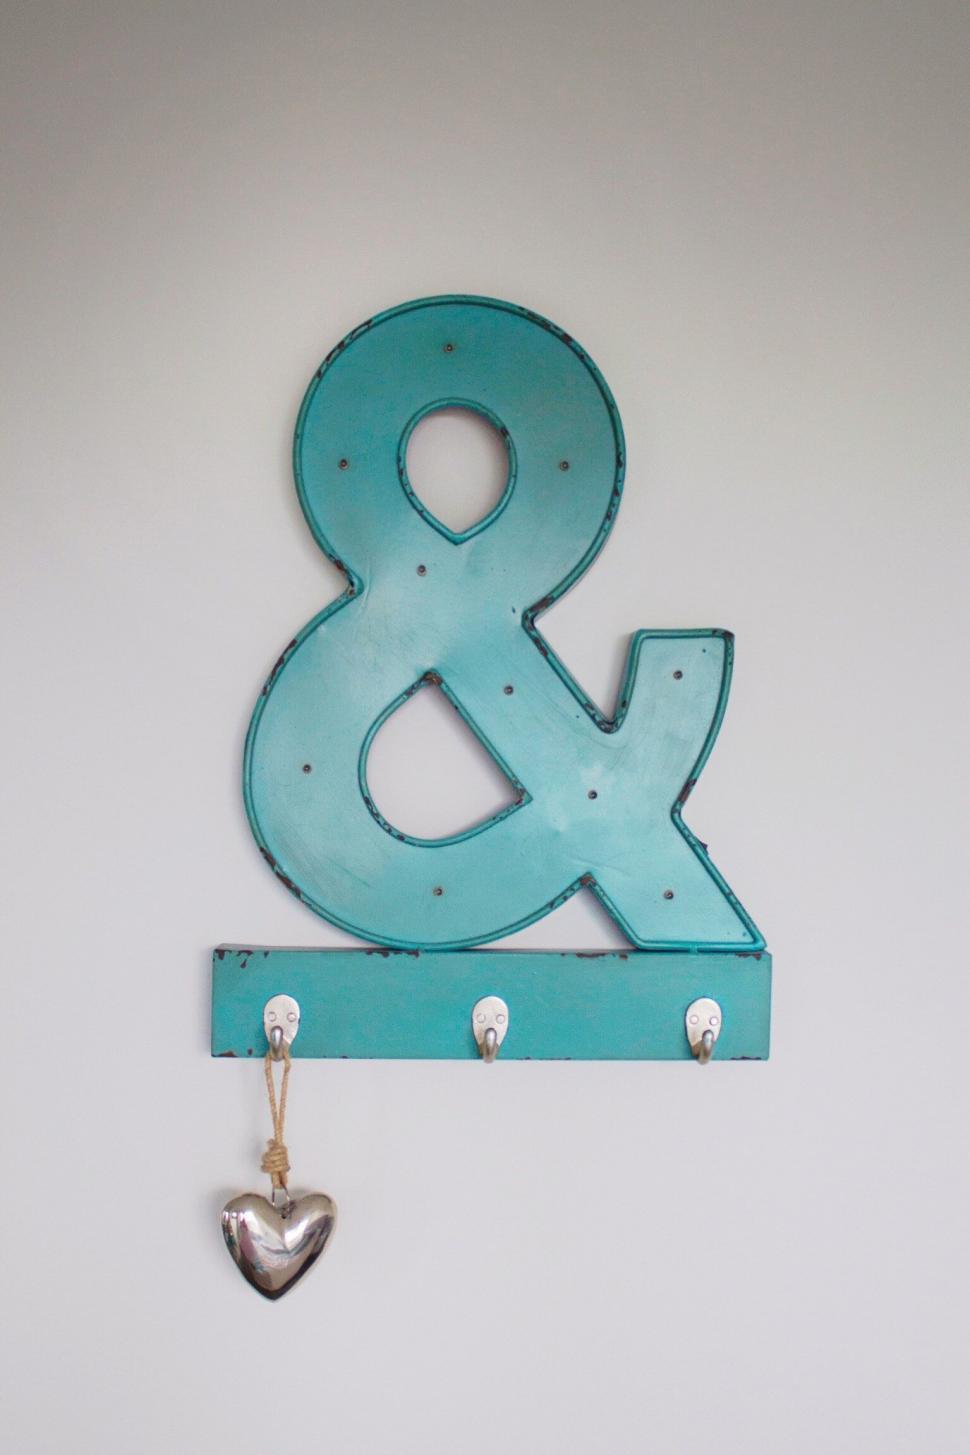 Free Image of Turquoise & symbol wall decor with heart 